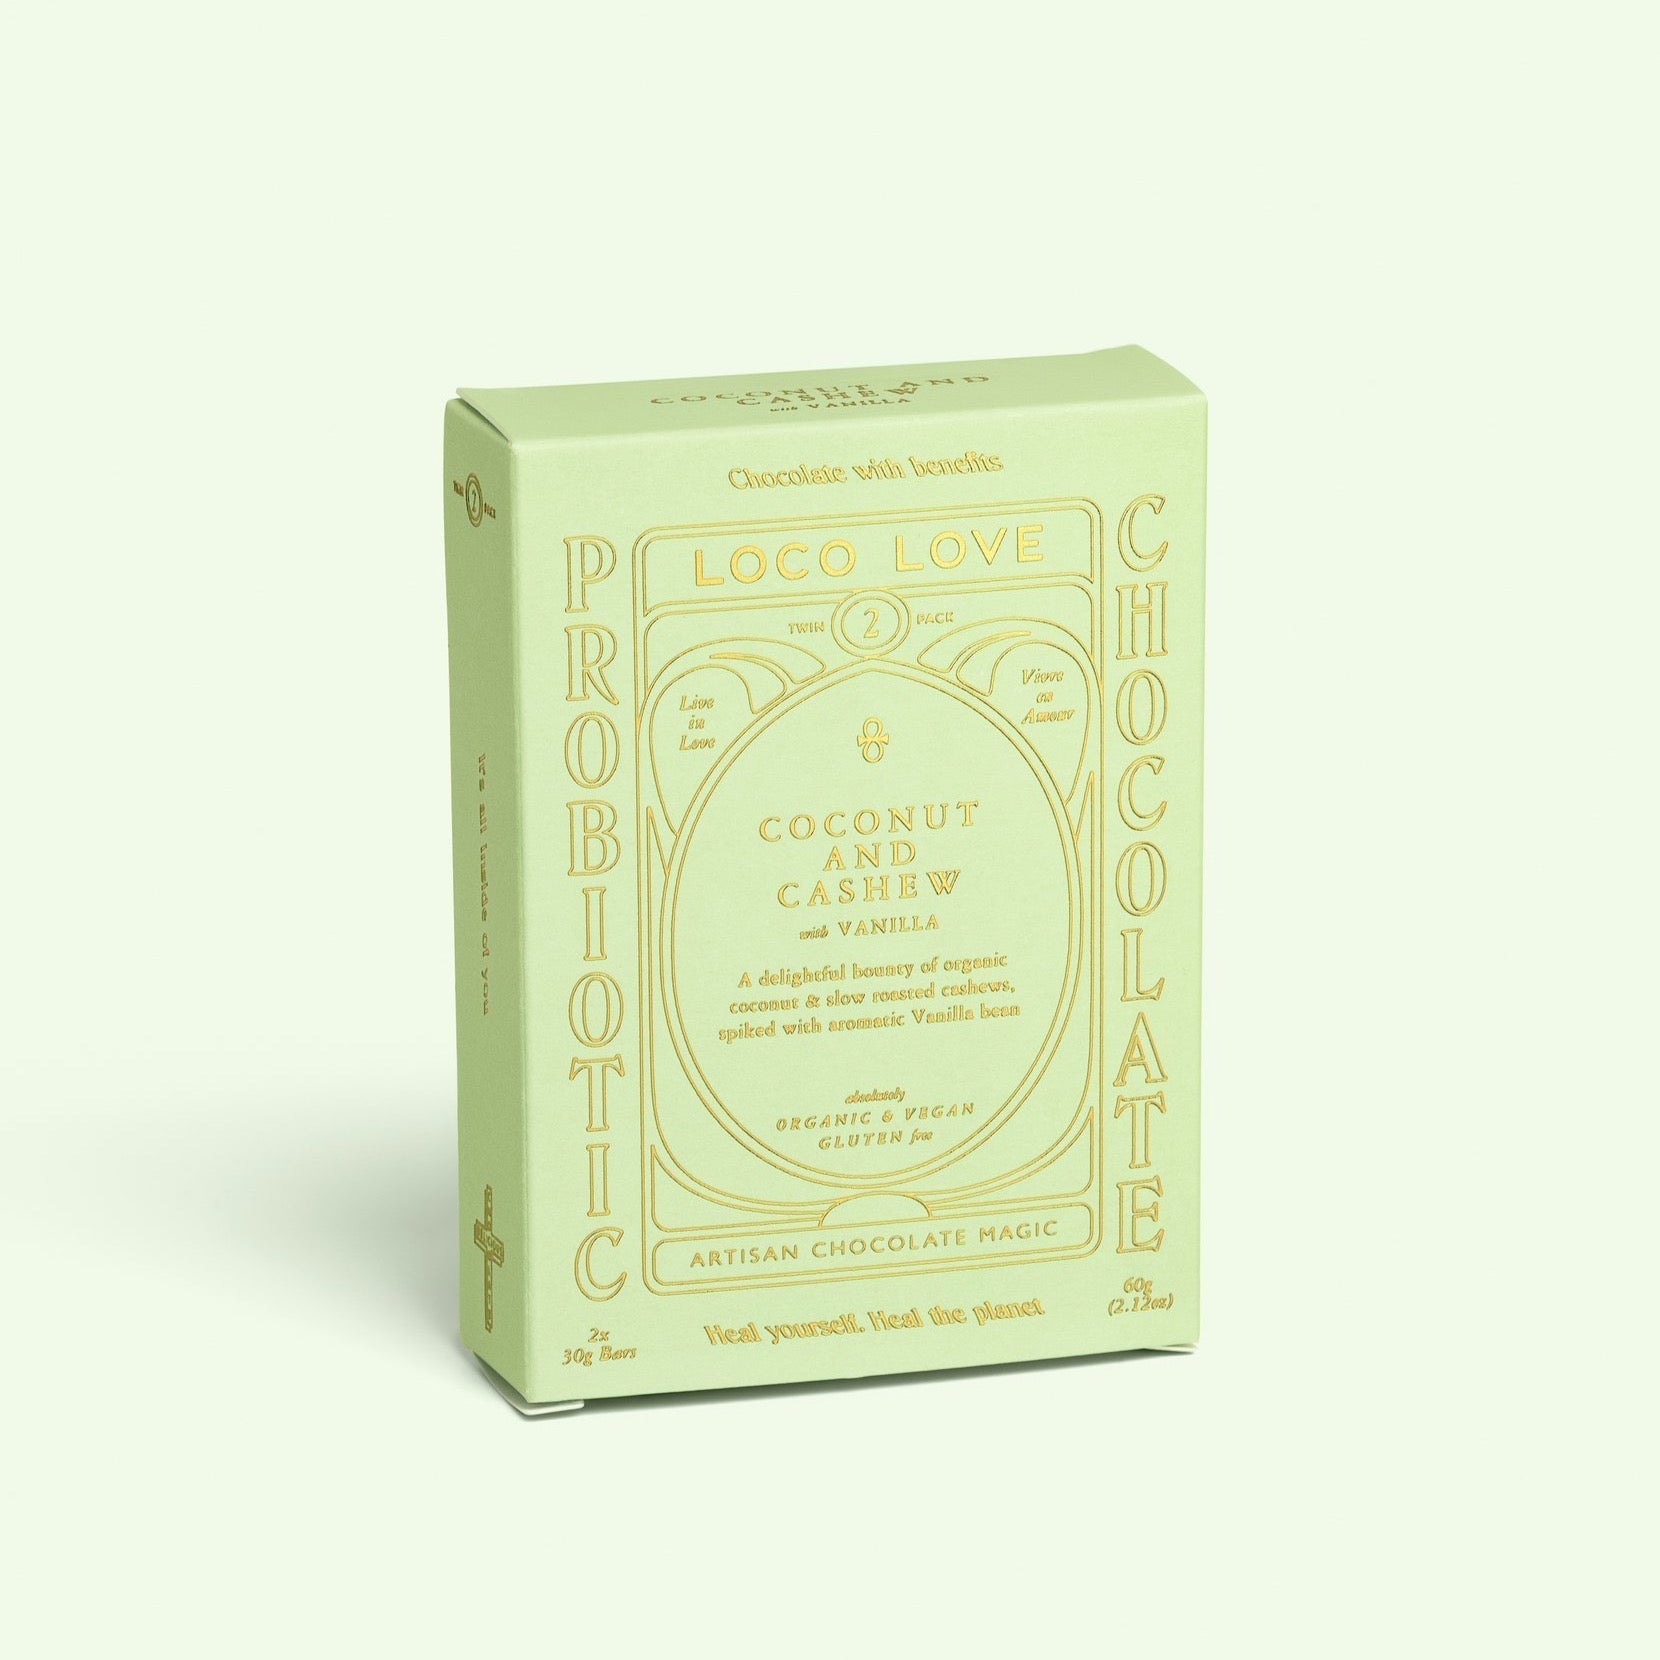 coconut & cashew chocolate Twin Pack by Loco Love